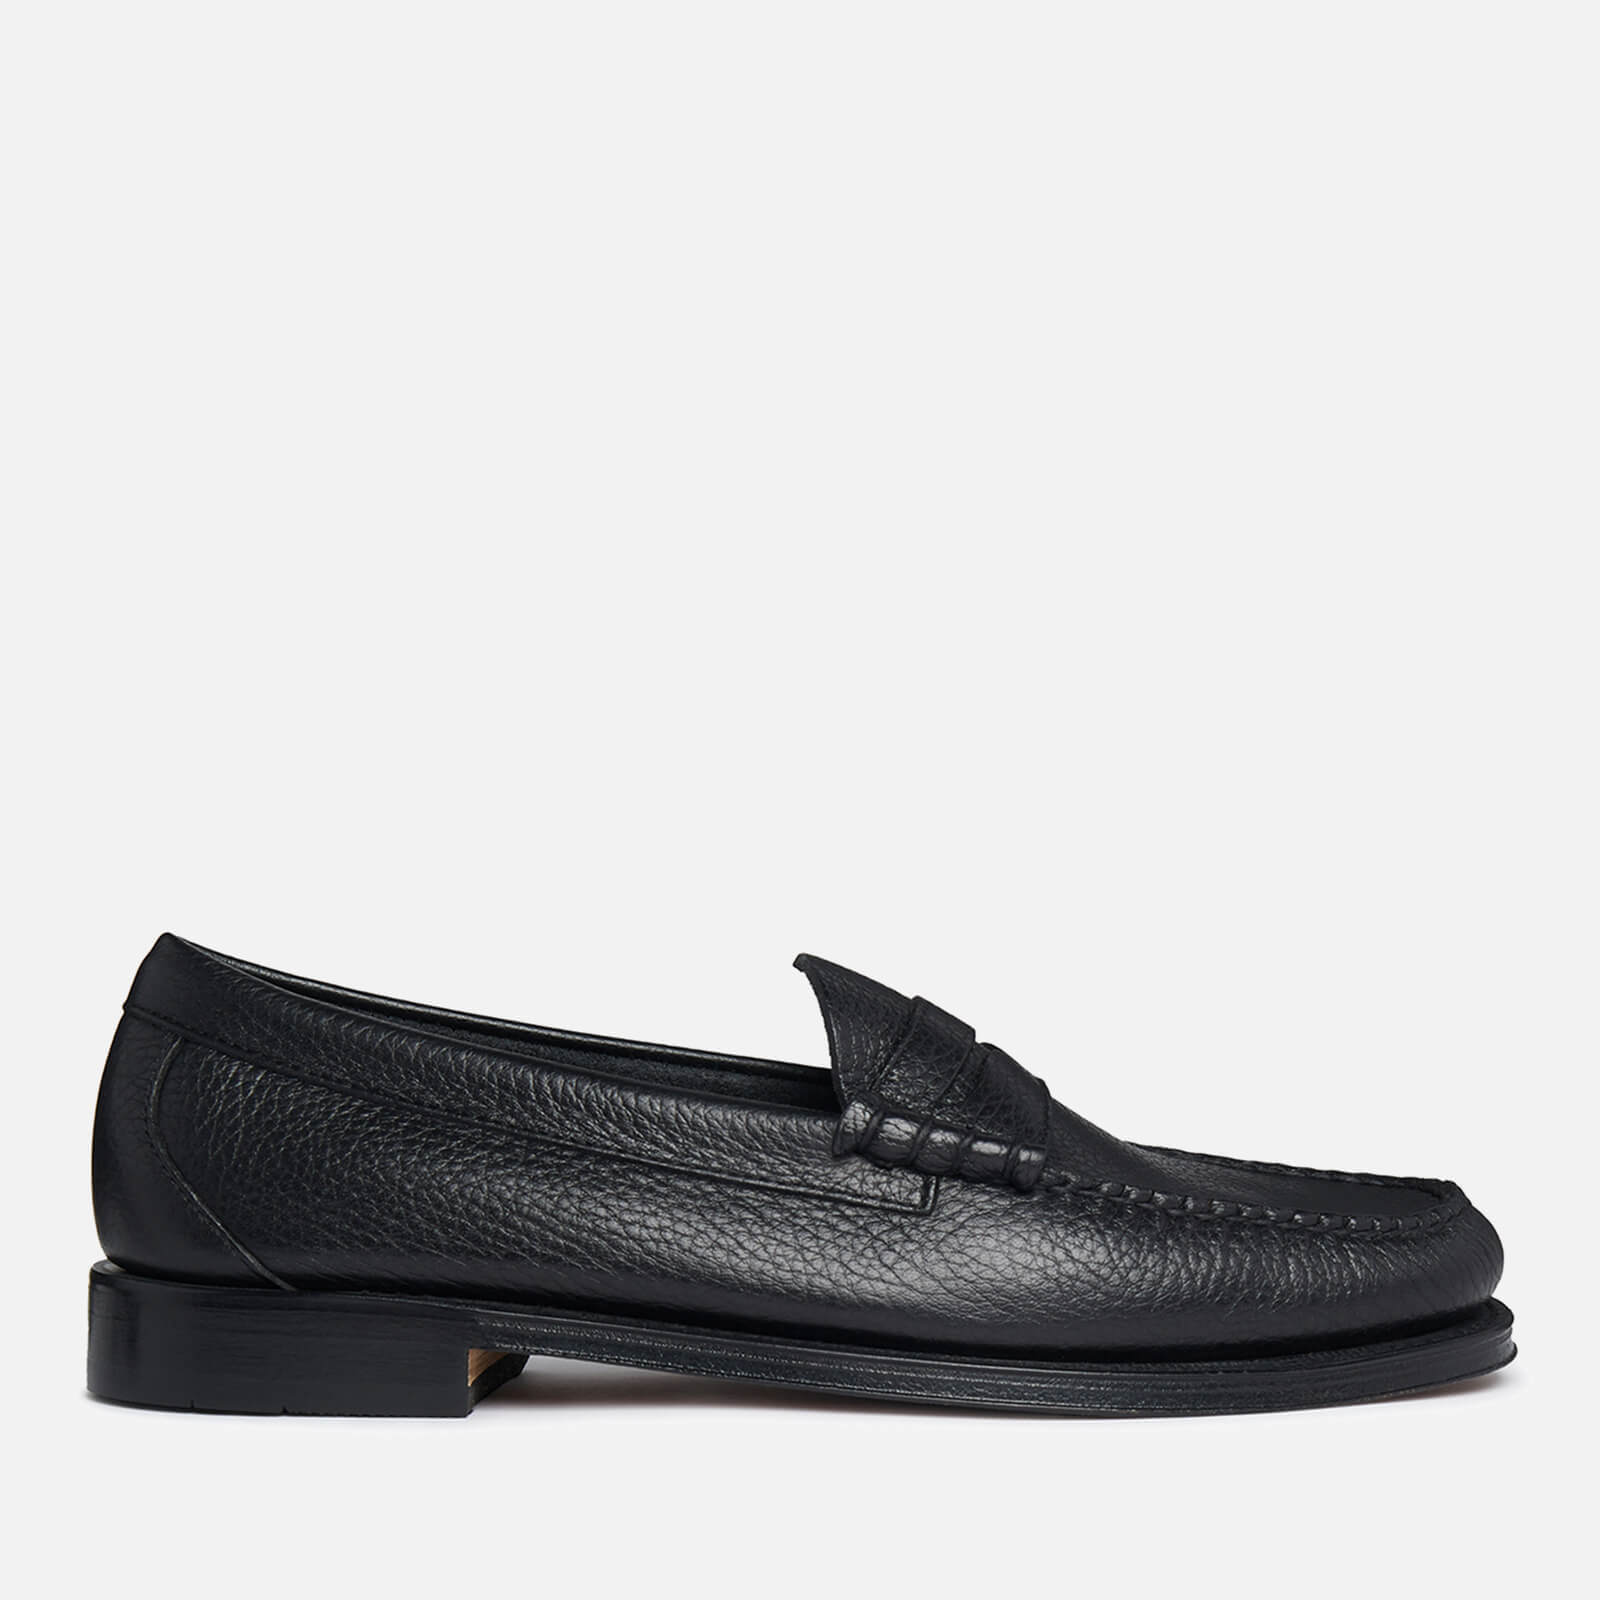 G.H.BASS Men’s Weejun Heritage Larson Leather Loafer